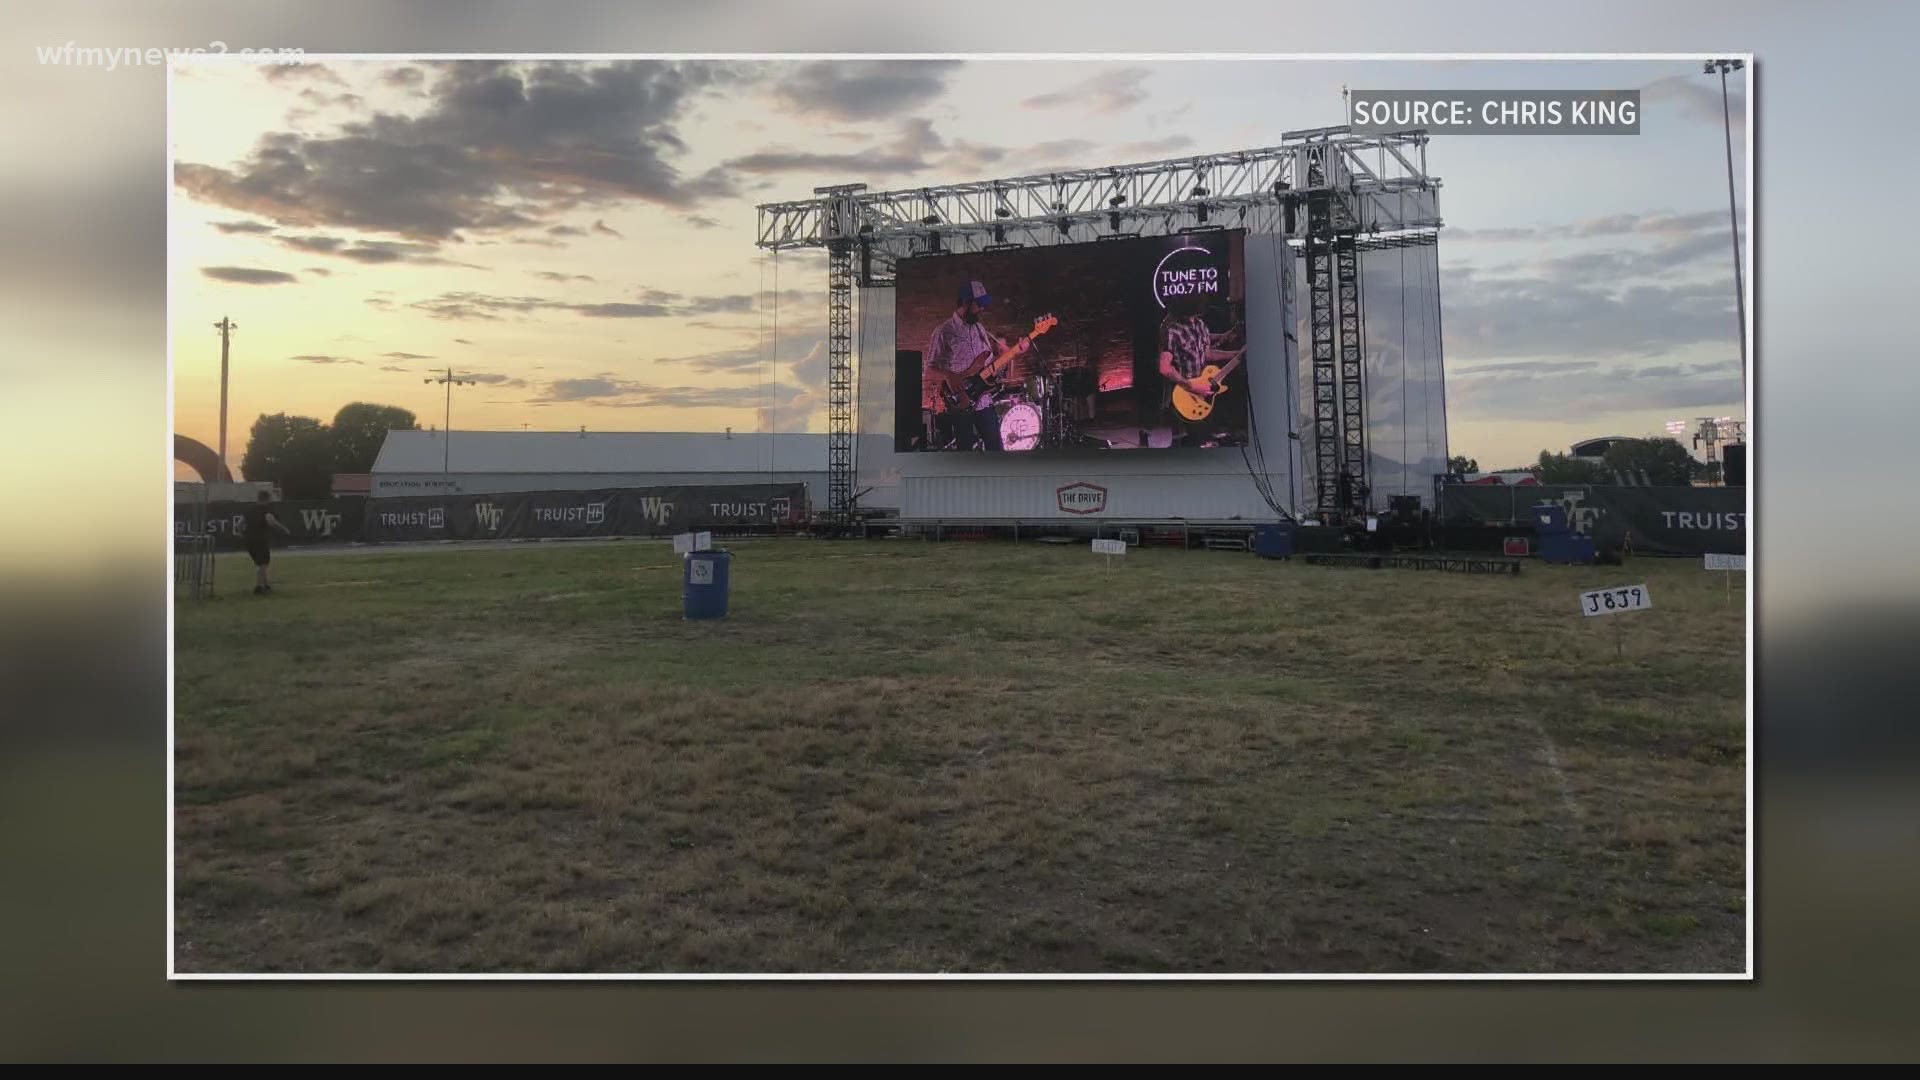 A live concert series will be held at The Drive at the Winston-Salem Fairgrounds. The Drive will host international touring artists The Marcus King Band on the 23rd.